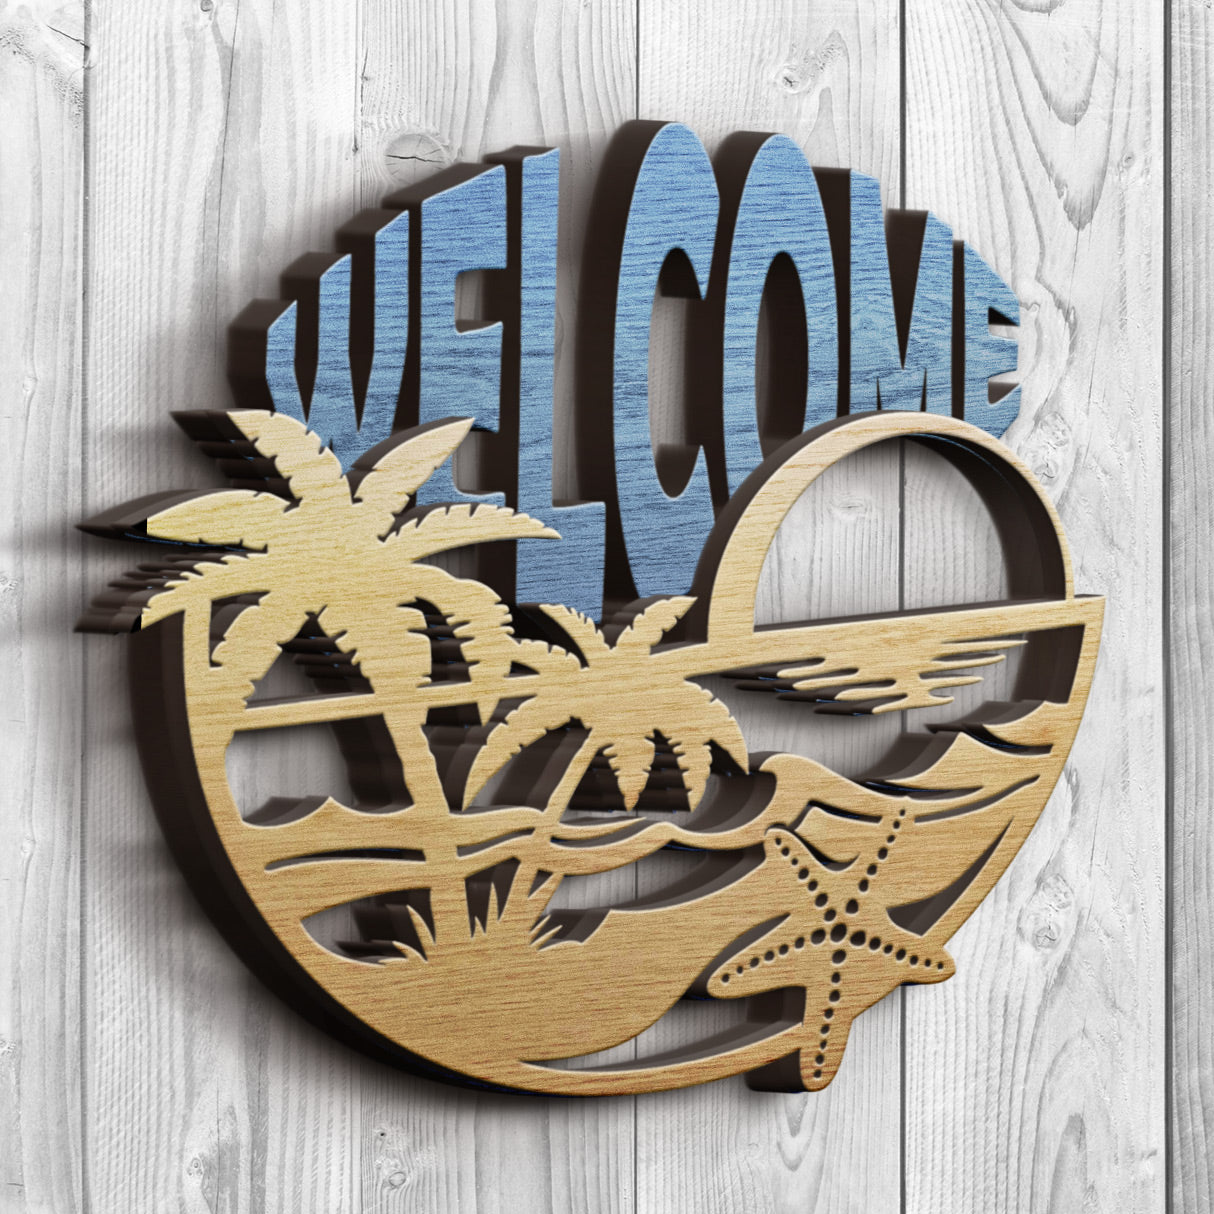 Beach ocean Multi layer welcome sign. SVG PDF DXF cutting template for laser cutting, engraving, Glowforge, Cricut, Silhouette, CNC plasma